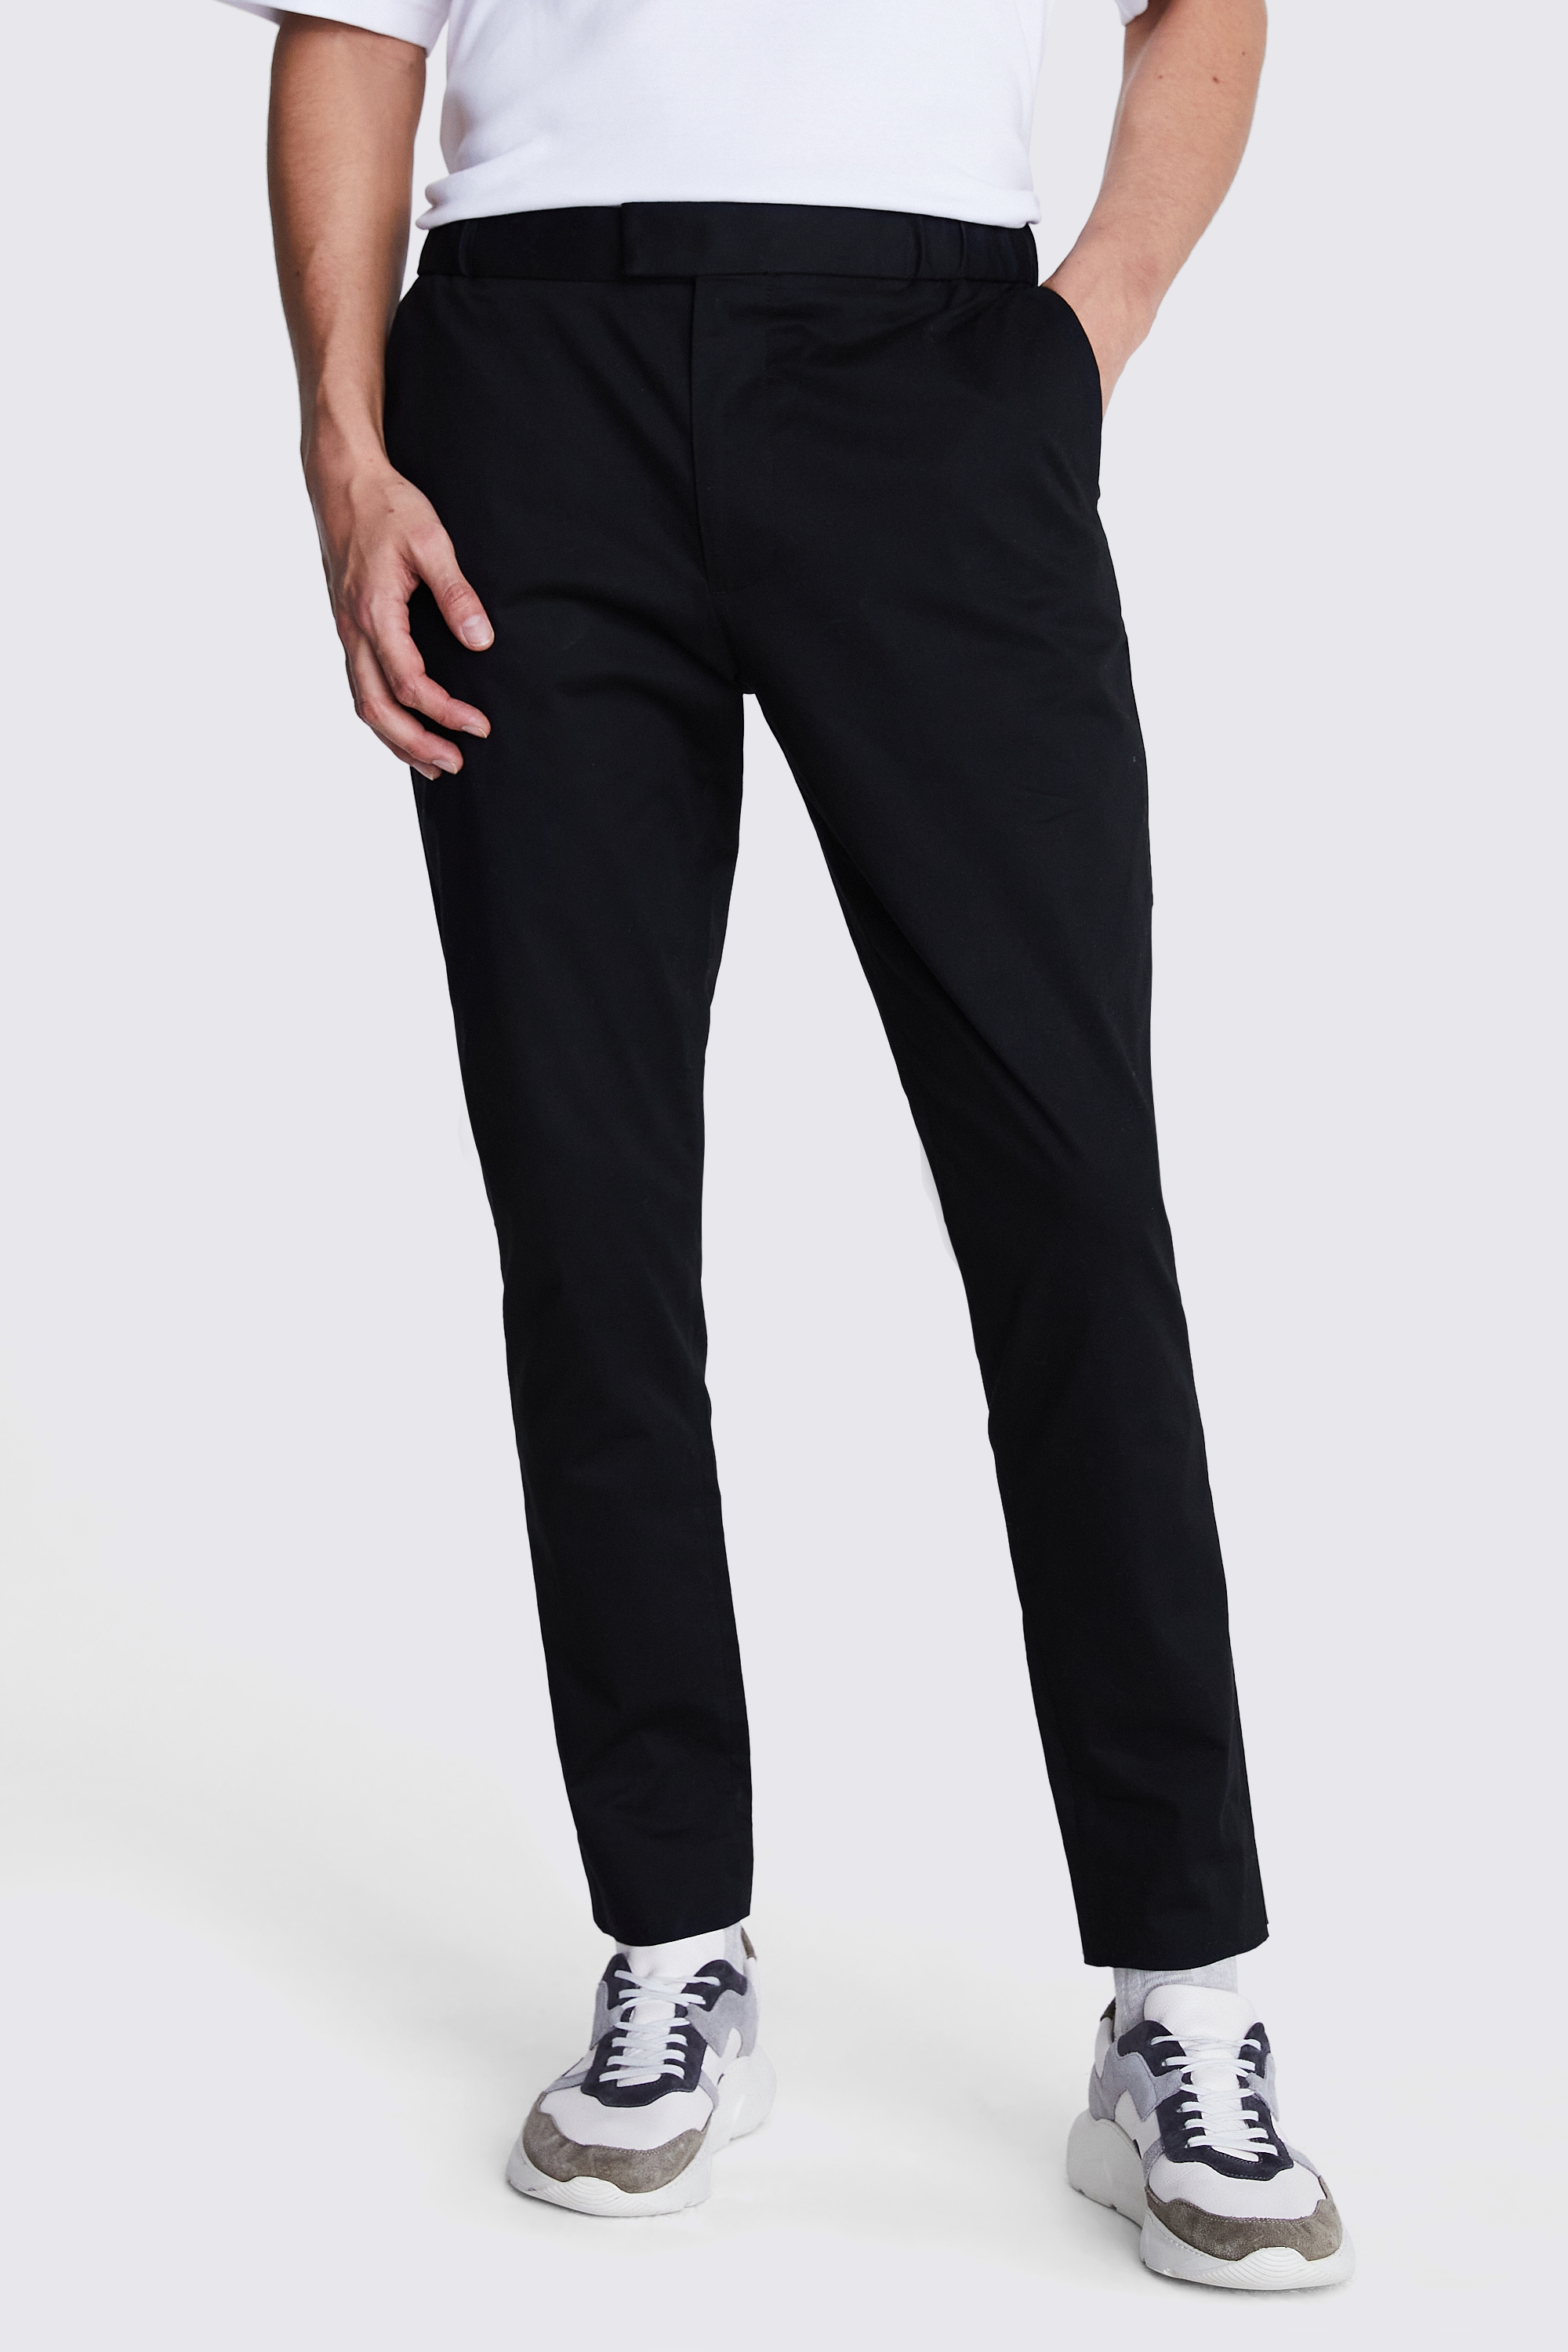 Black Worker Chino | Buy Online at Moss